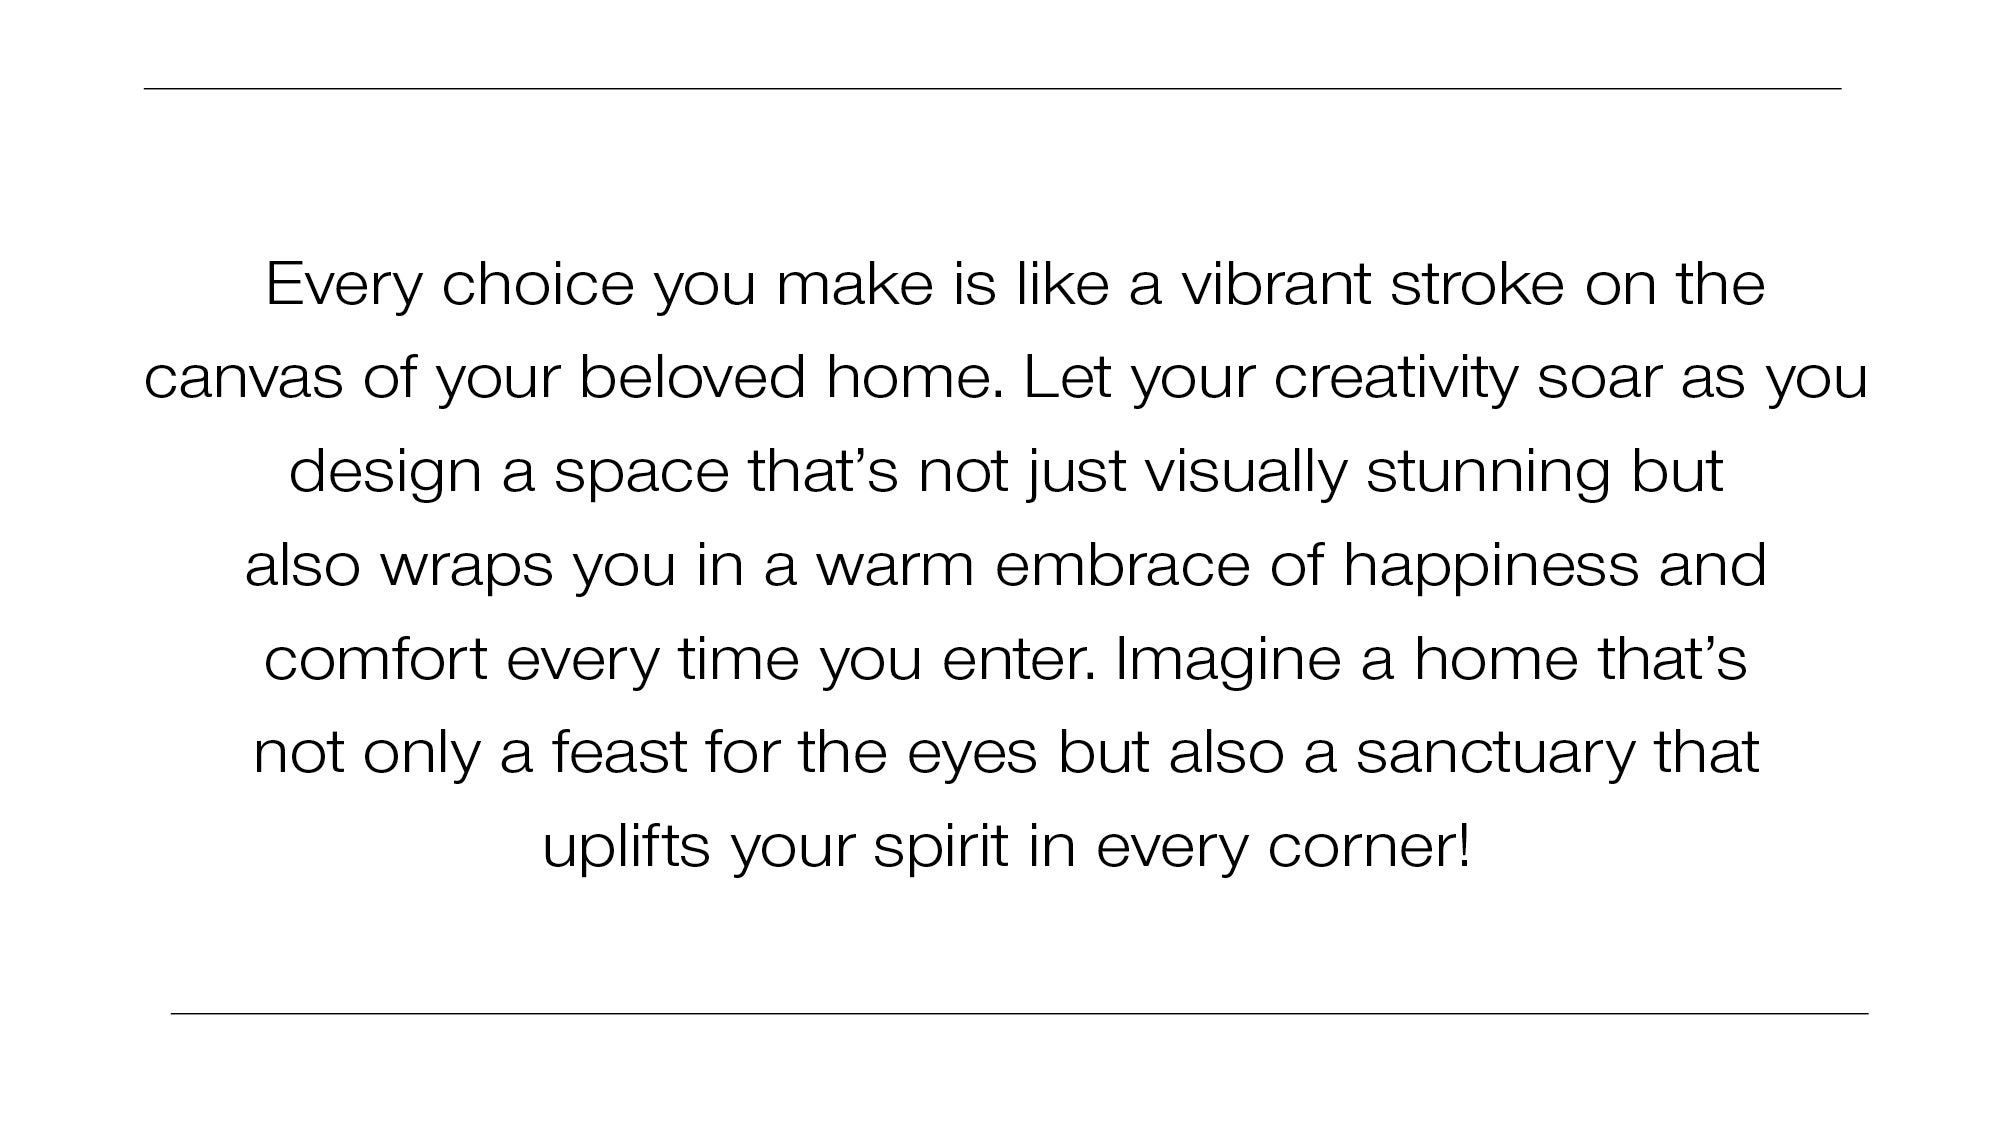 Every choice you make is like a vibrant stroke on the canvas of your beloved home. Let your creativity soar as you design a space that's not just visually stunning but also wraps you in a warm embrace of happiness and comfort every time you enter. Imagine a home that's not only a feast for the eyes but also a sanctuary that uplifts your spirit in every corner!